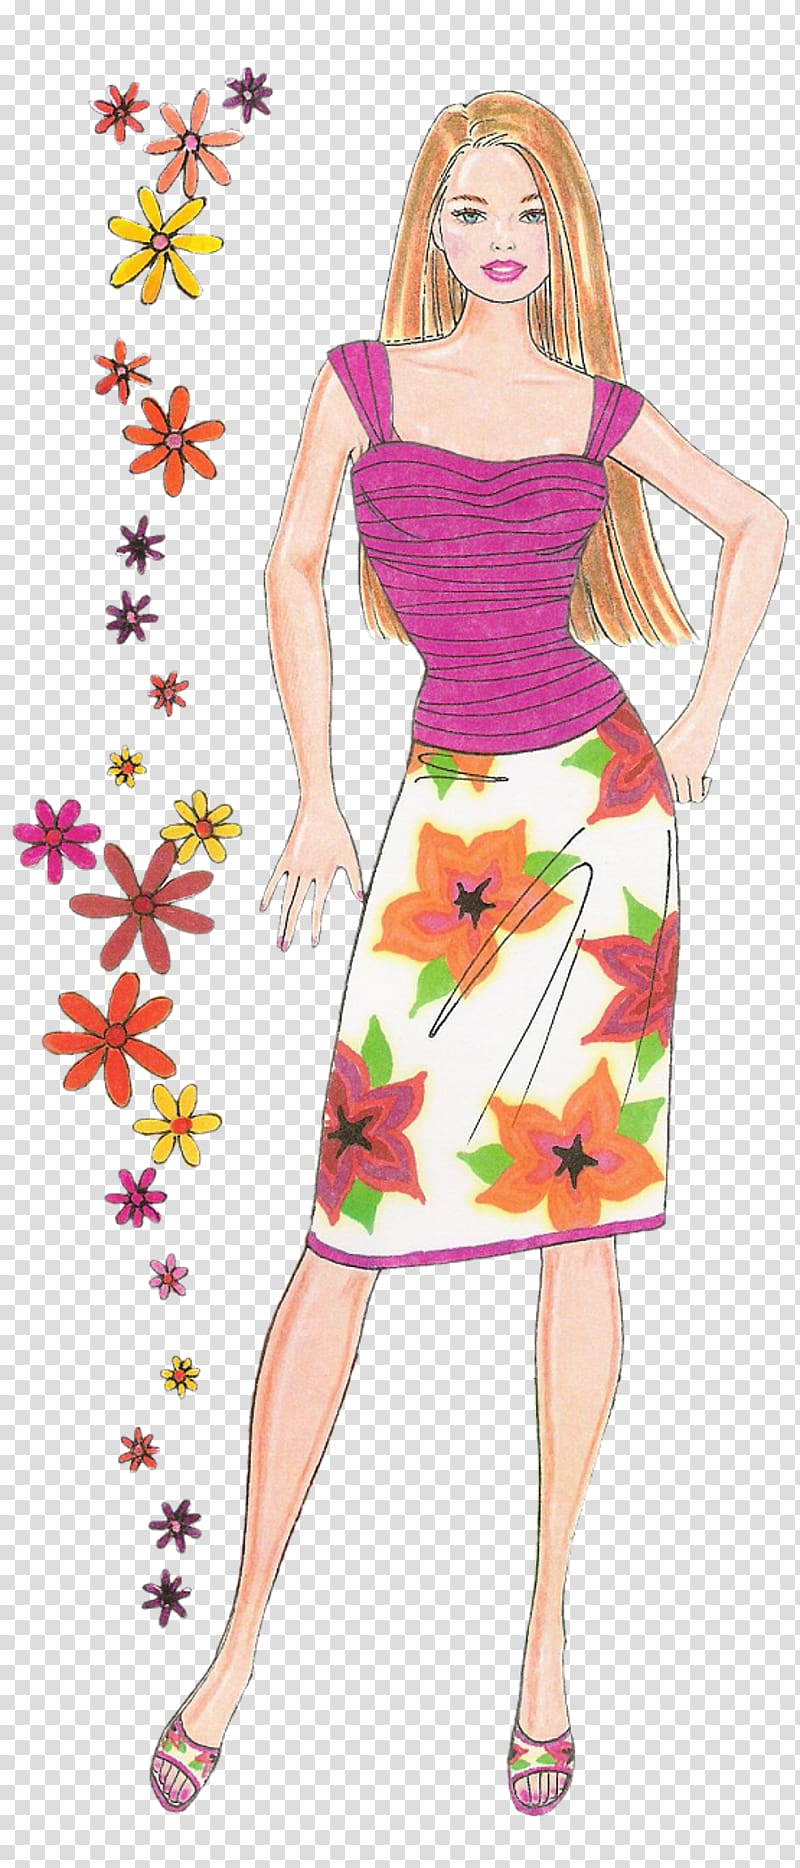 Pin-up girl Cartoon Fashion Barbie, Crafts Woman transparent background PNG clipart